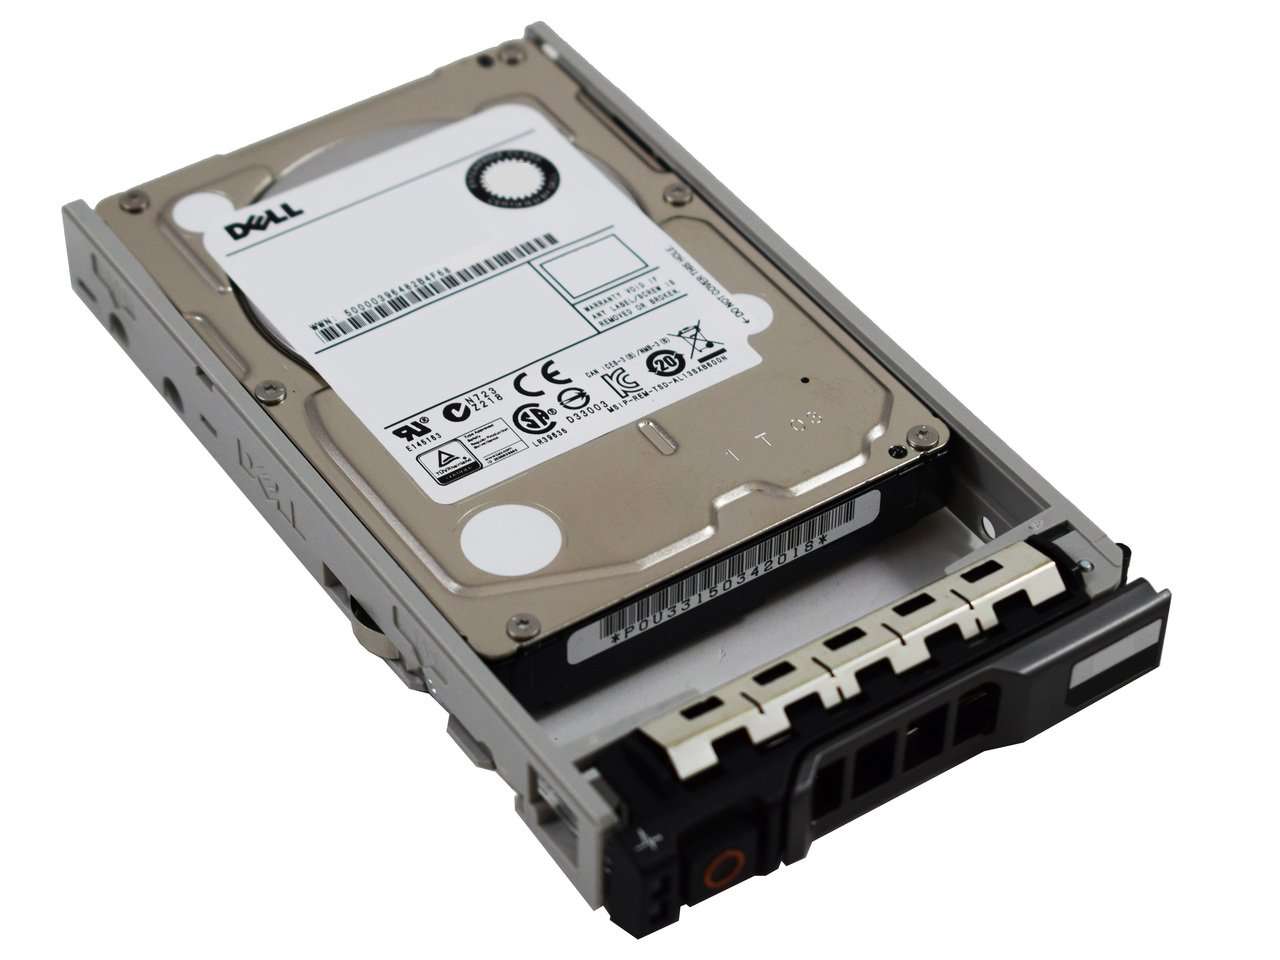 Dell G13 342-5752 300GB 15K RPM SAS 6Gb/s 512n 2.5" Manufacturer Recertified HDD